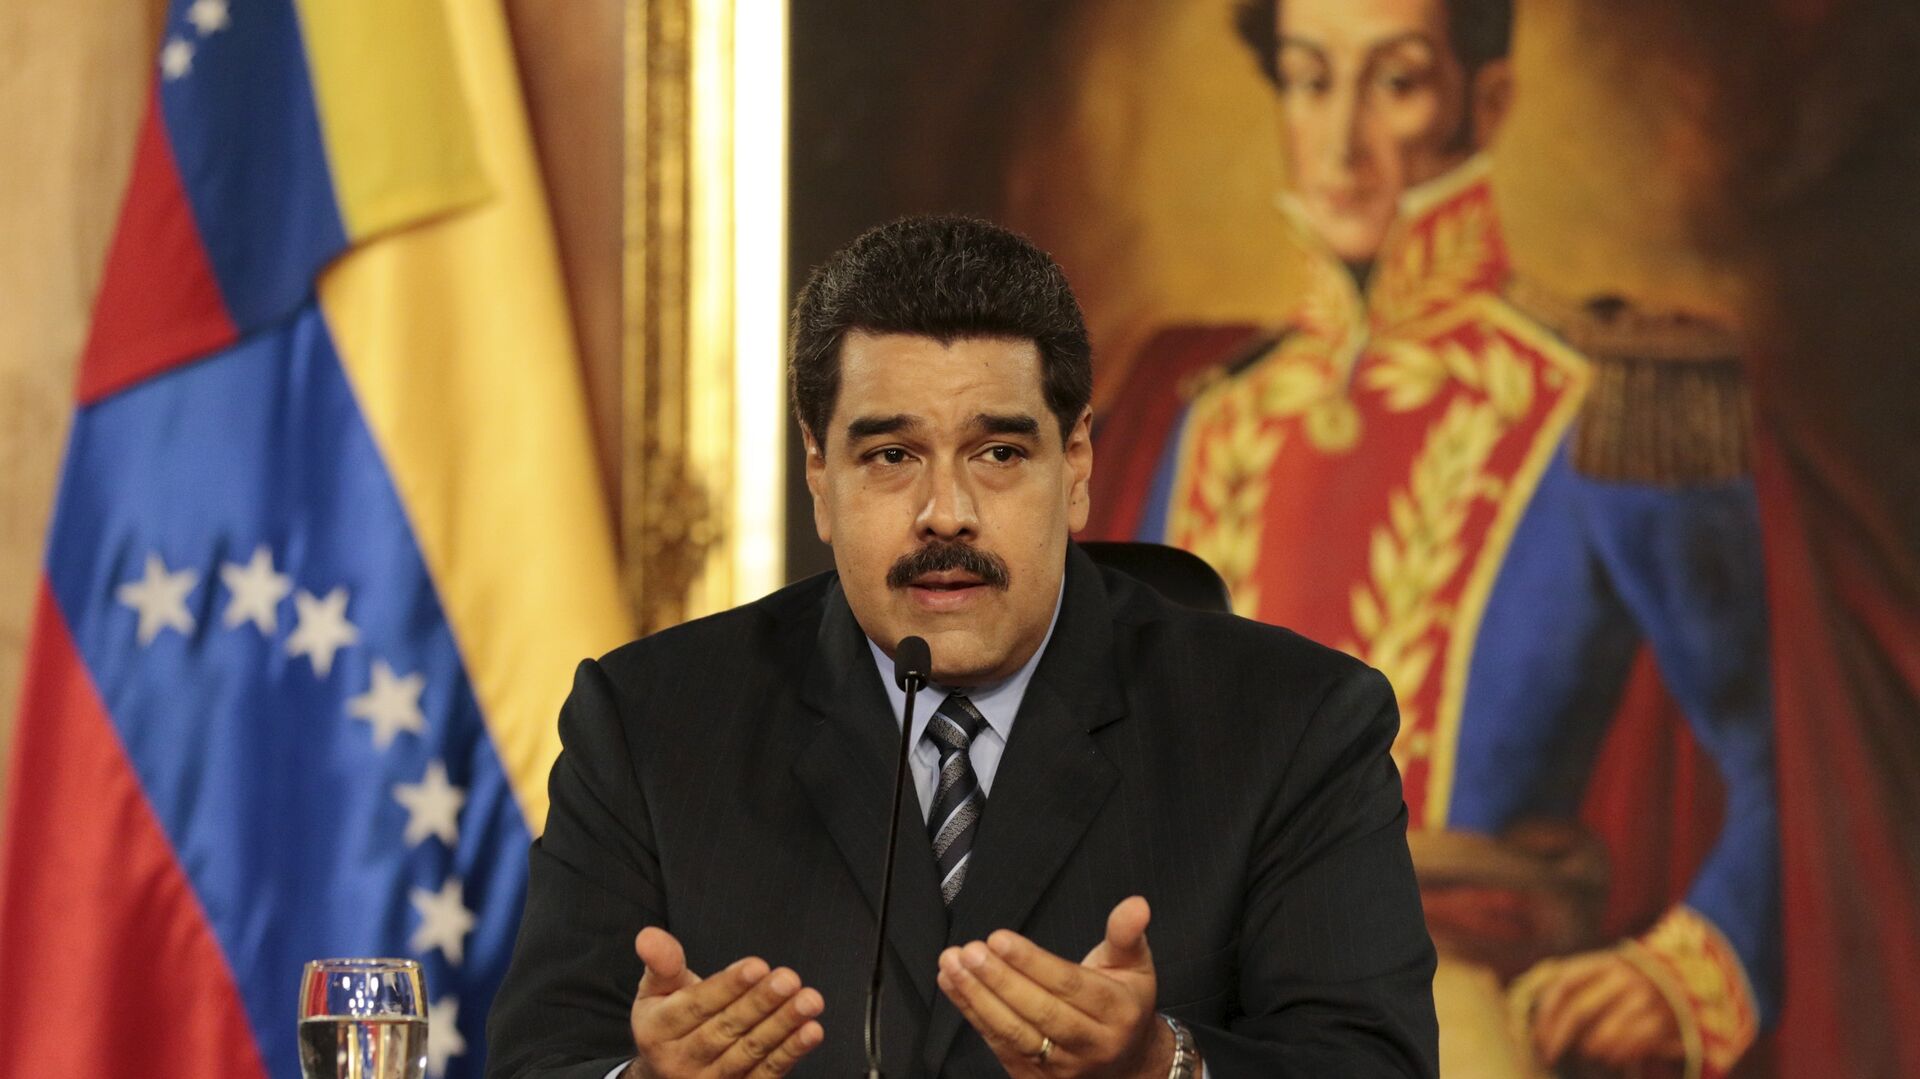 Venezuela's President Nicolas Maduro speaks during a meeting at Miraflores Palace, in front of a painting of South American revolutionary hero Simon Bolivar, in Caracas, in this handout picture provided by Miraflores Palace on February 17, 2016.  - Sputnik Mundo, 1920, 21.08.2021